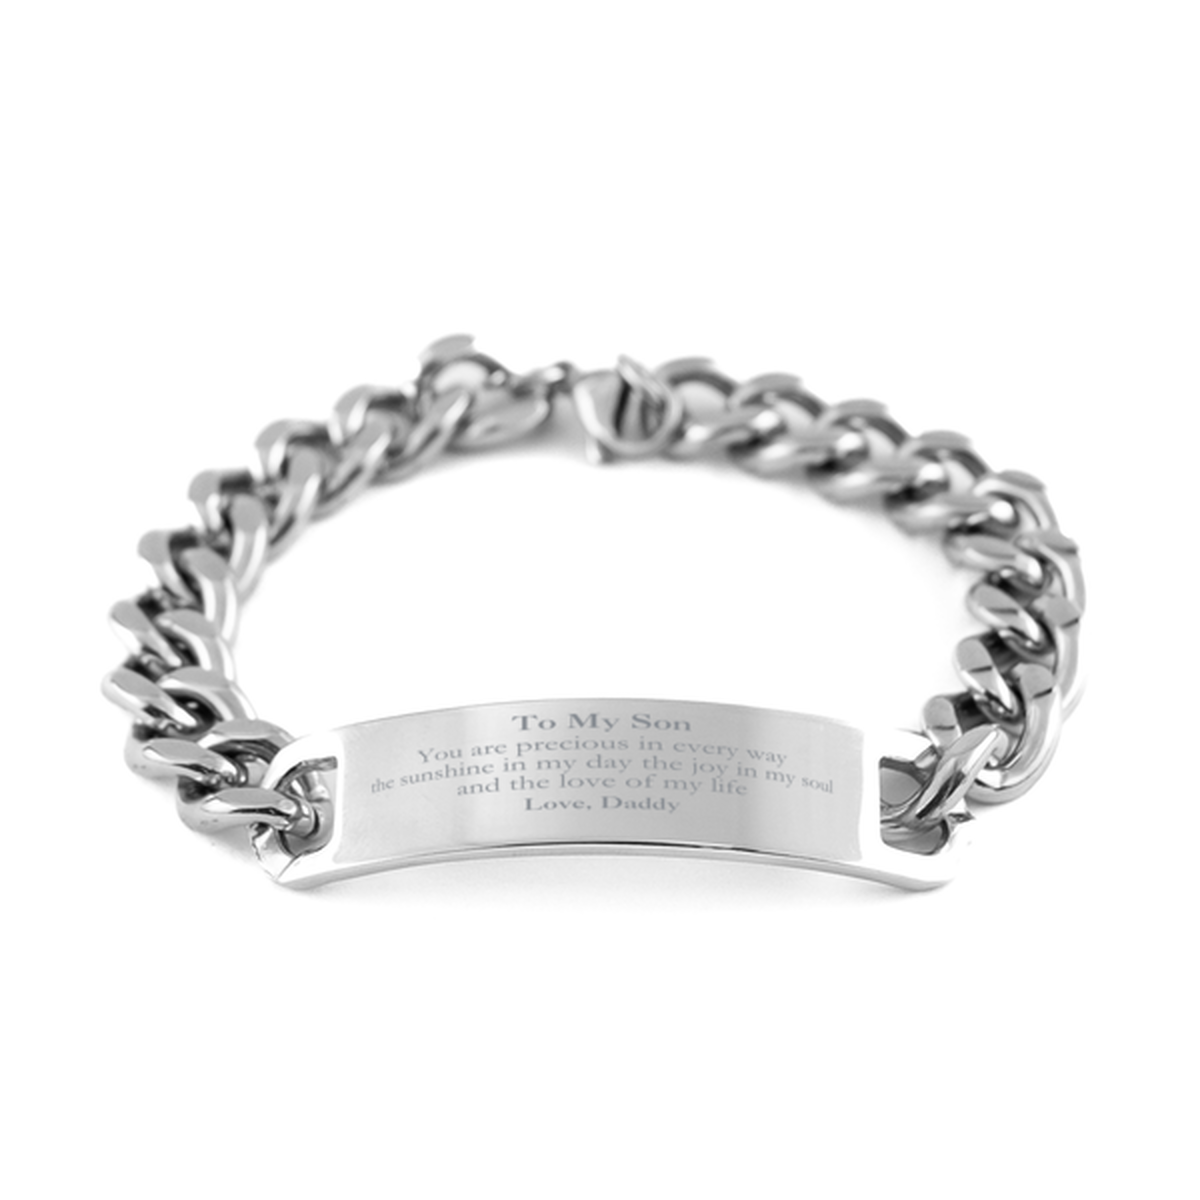 Graduation Gifts for Son Cuban Chain Stainless Steel Bracelet Present from Daddy, Christmas Son Birthday Gifts Son You are precious in every way the sunshine in my day. Love, Daddy